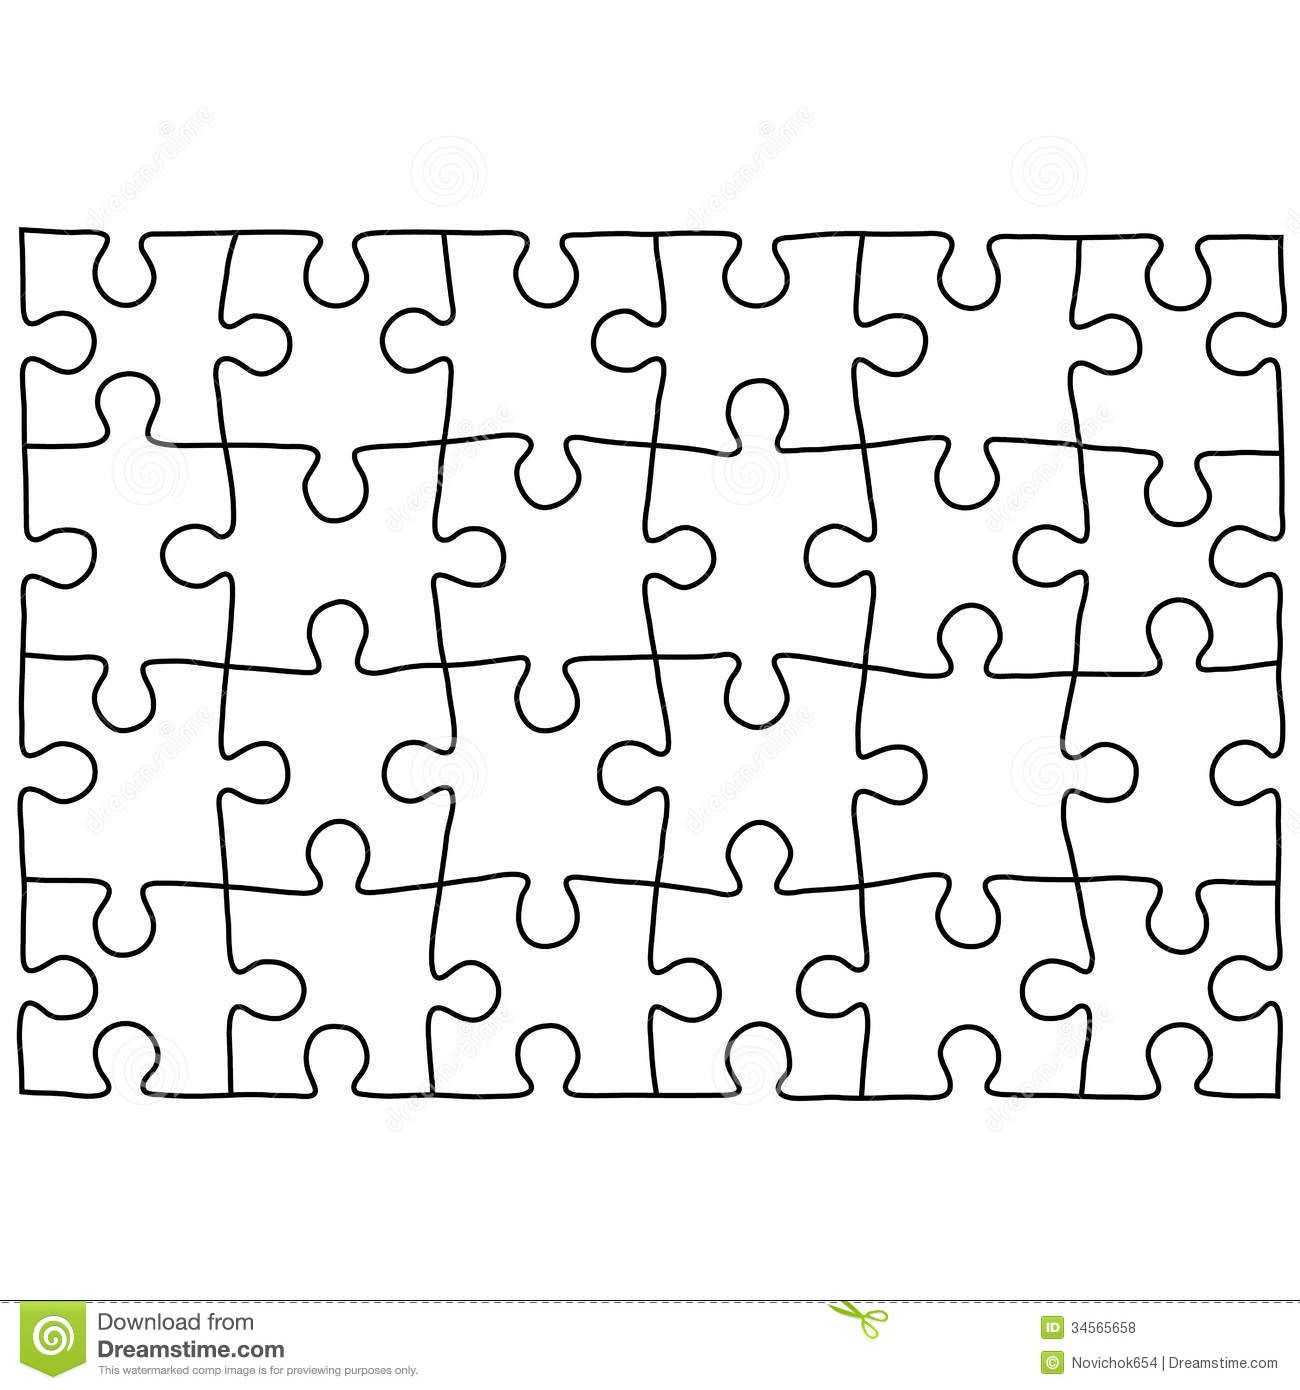 026 Jig Saw Puzzle Template Ideas Astounding Jigsaw Free Inside Jigsaw Puzzle Template For Word